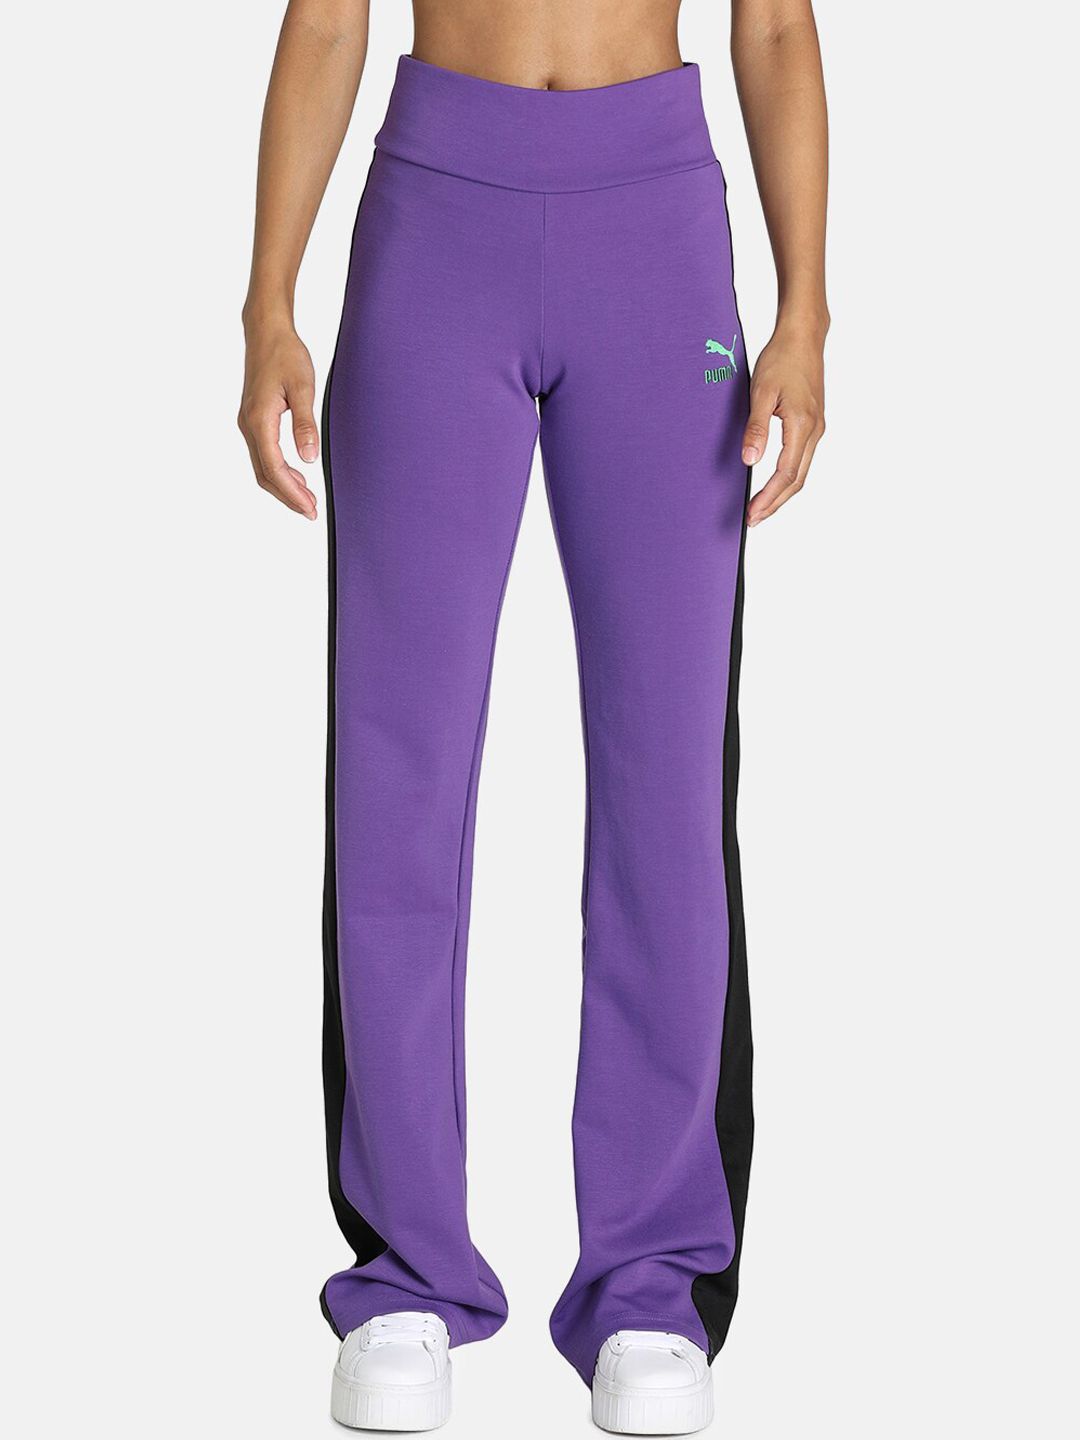 Puma Women Purple Solid Slim Fit Trackpants Price in India